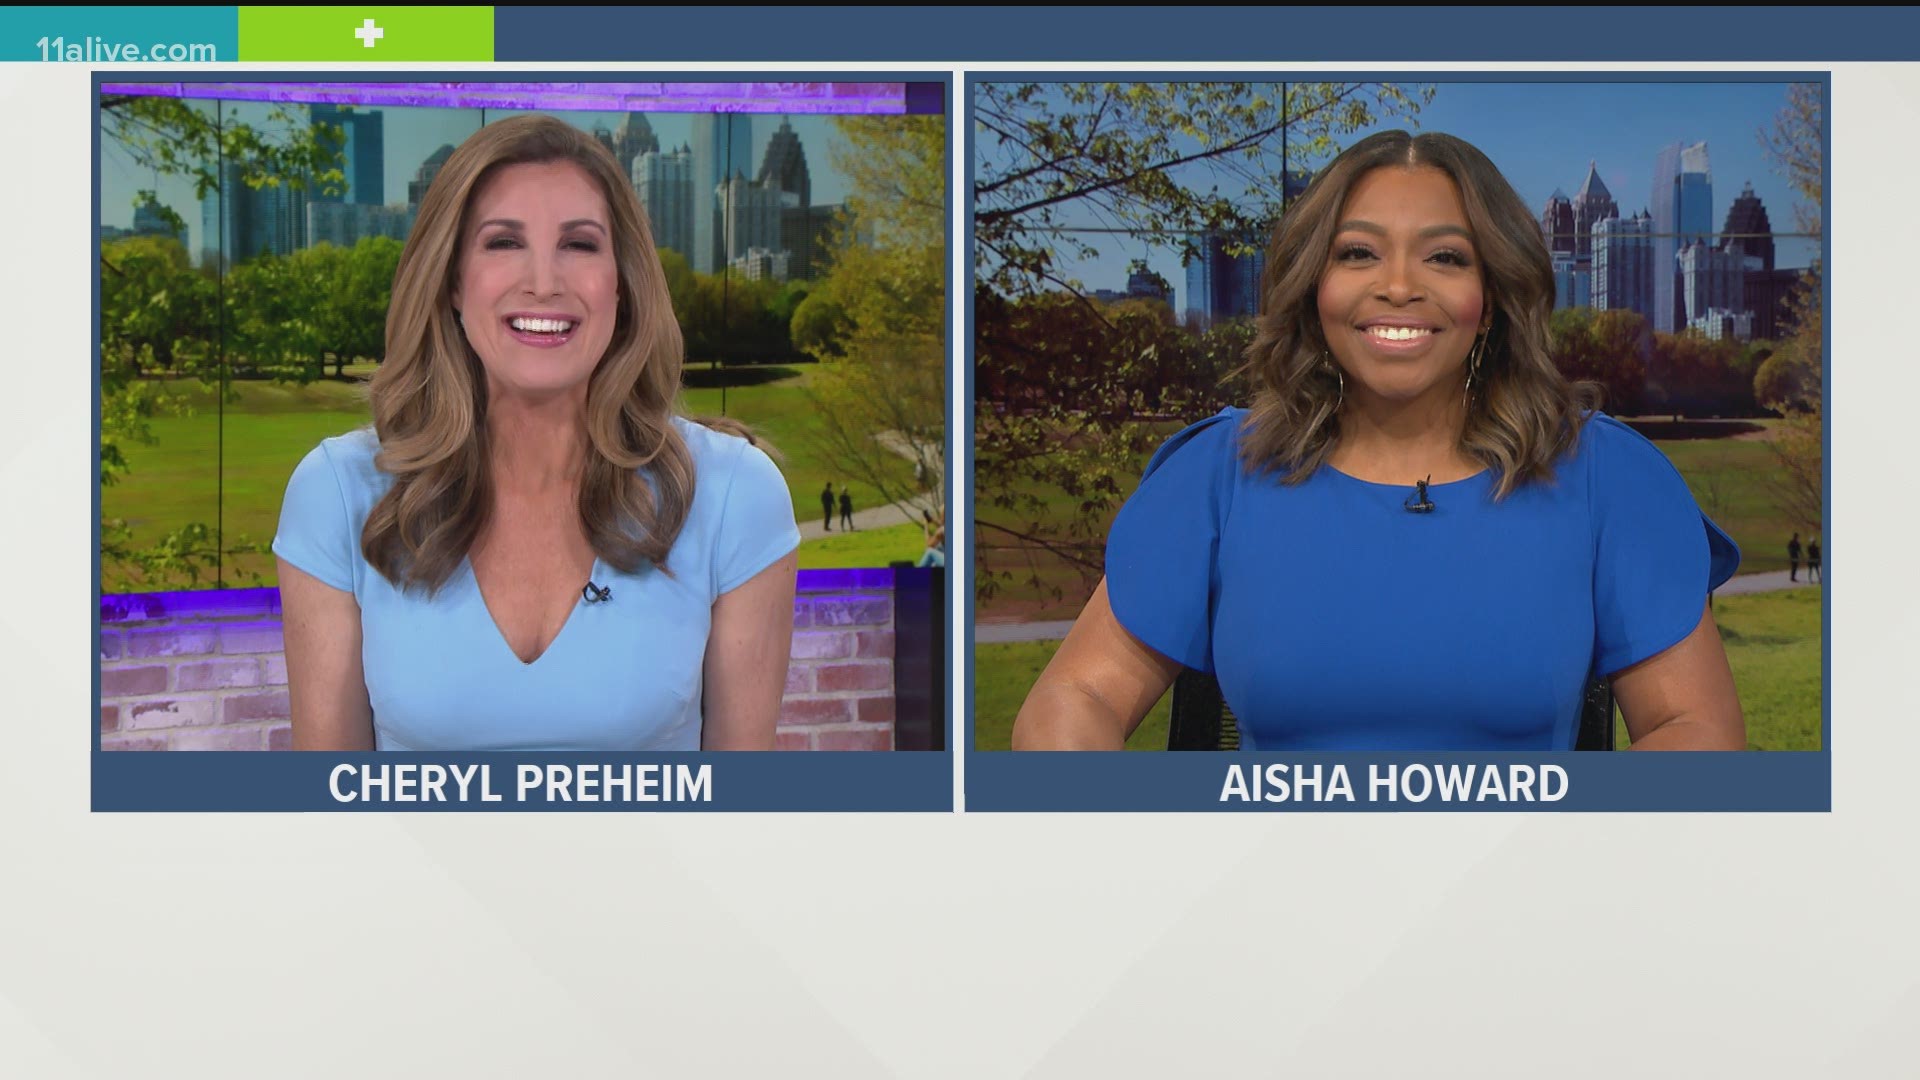 11Alive's Aisha Howard is back from maternity leave in the anchor chair after welcoming a baby girl!